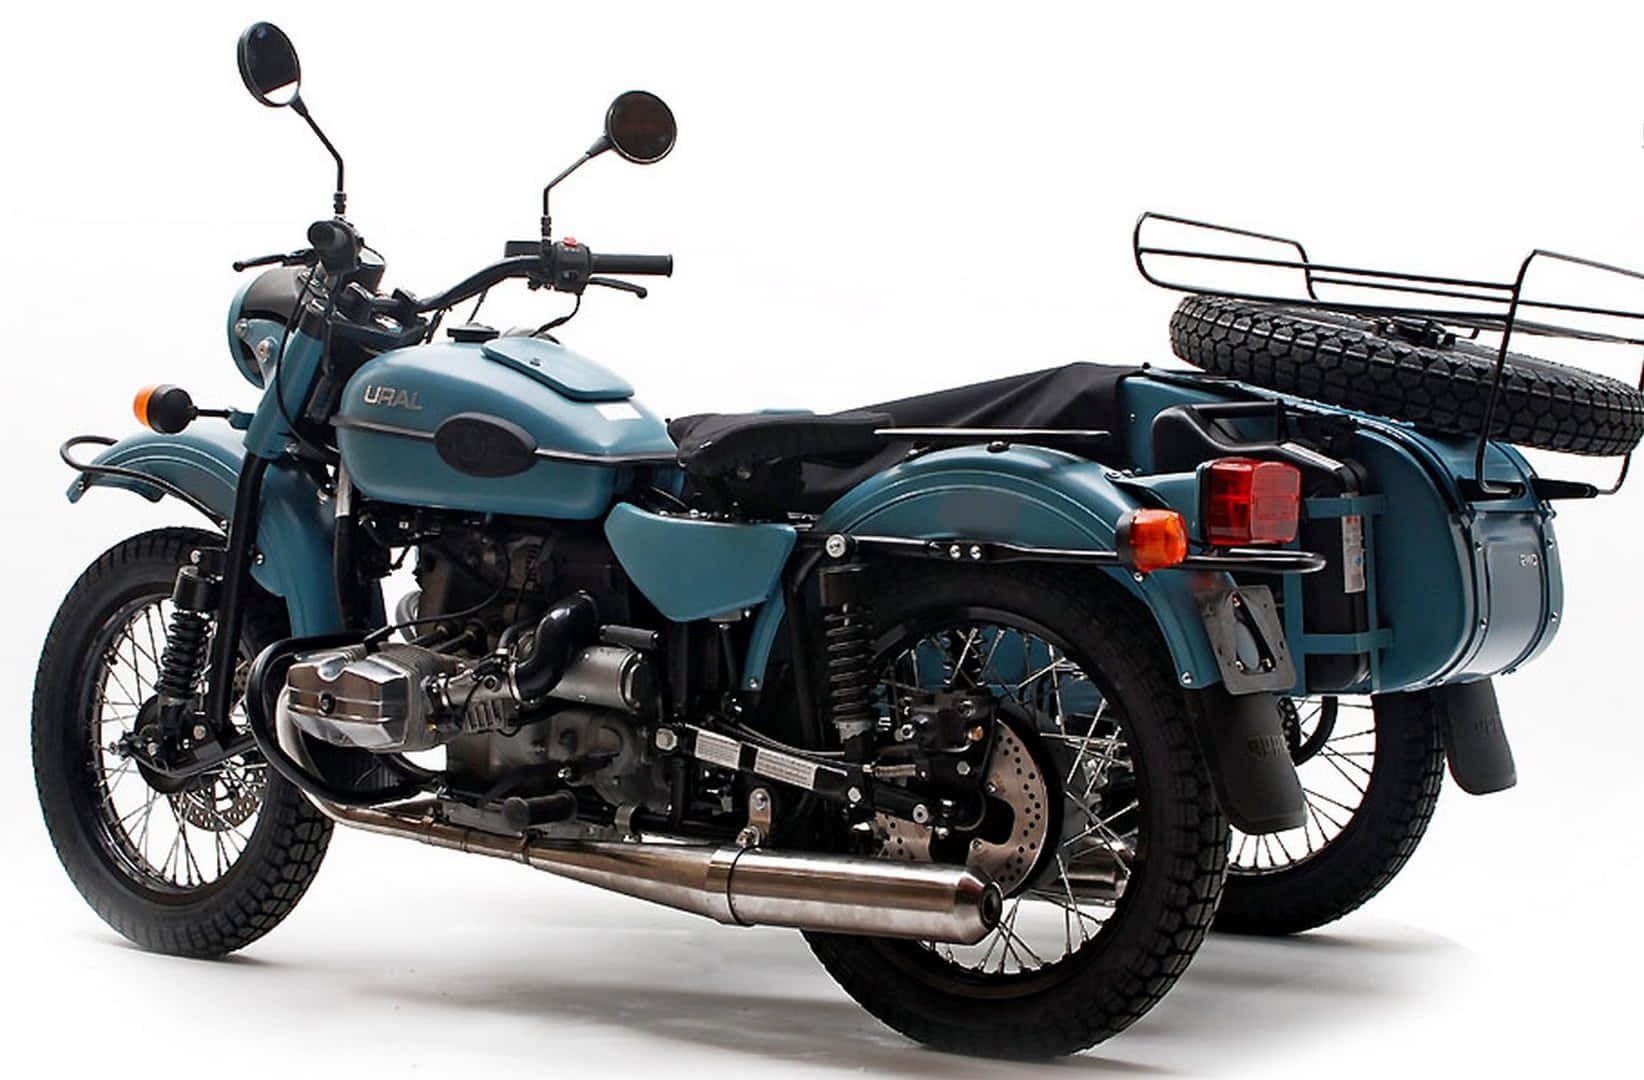 Majestic Ural Motorcycle Conquering The Snowy Wilderness. Wallpaper